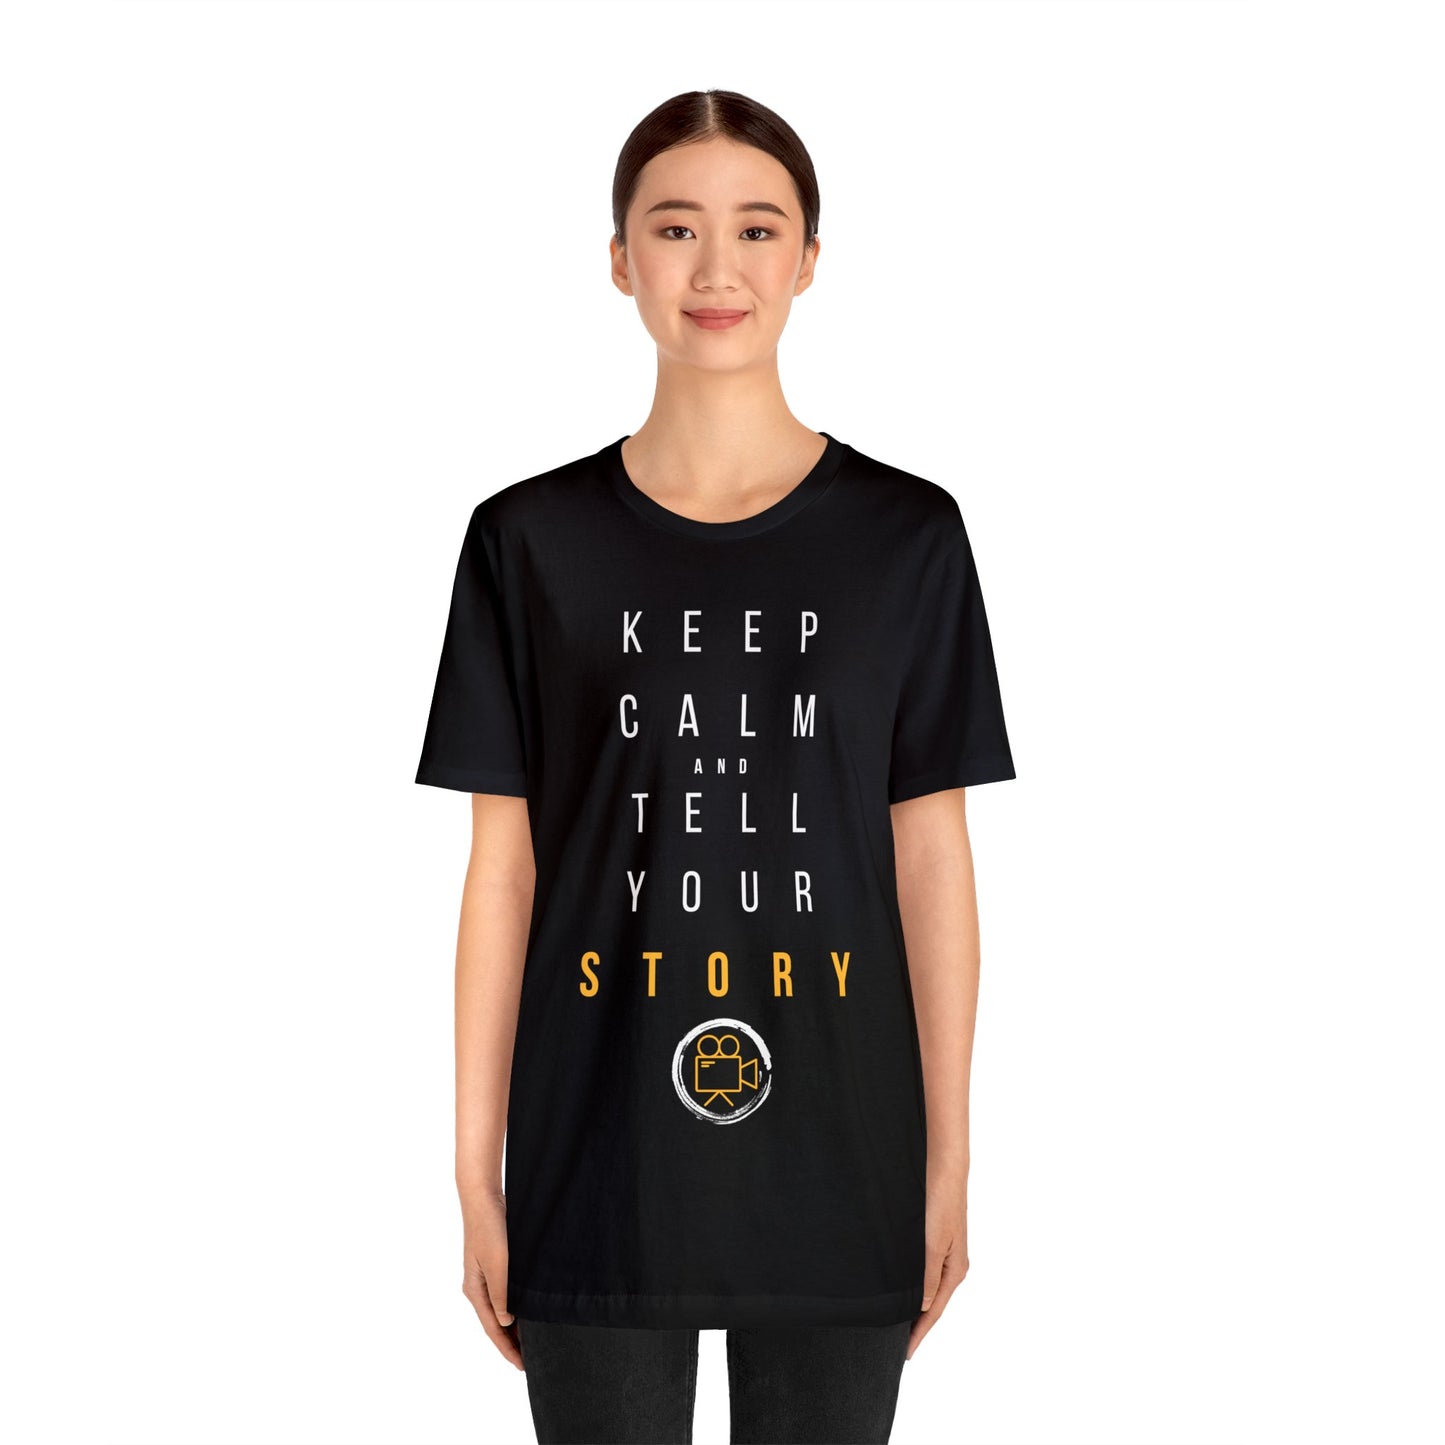 Tell Your Story Tee